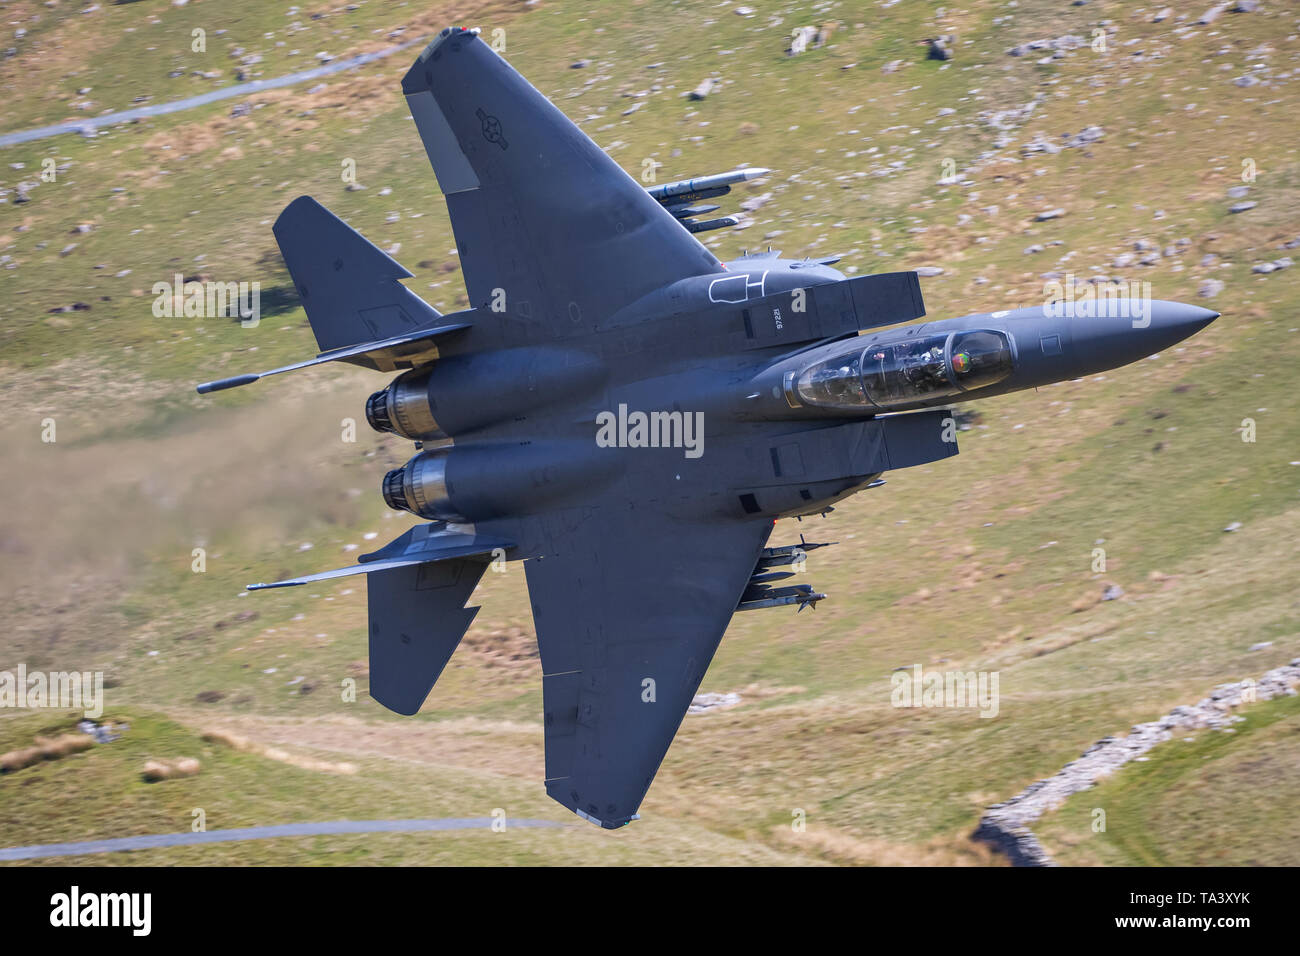 A USAF F-15 Strike Eagle passes through Mach Loop during low level training. Stock Photo